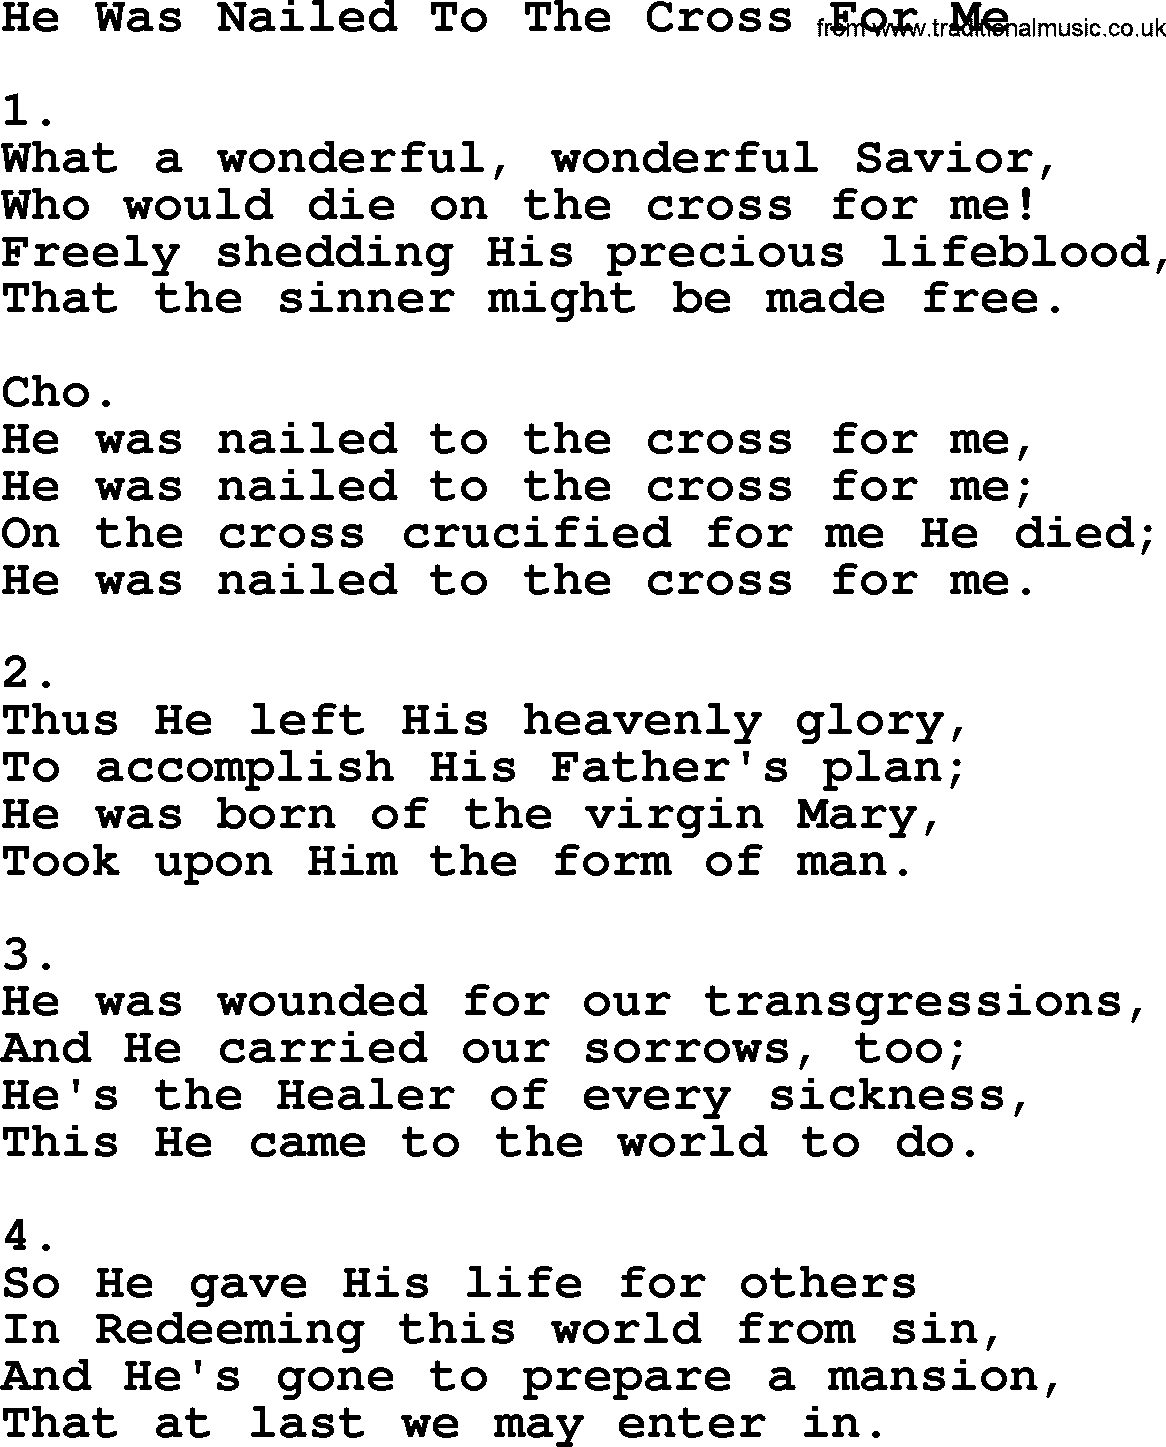 Apostolic & Pentecostal Hymns and Songs, Hymn: He Was Nailed To The Cross For Me lyrics and PDF